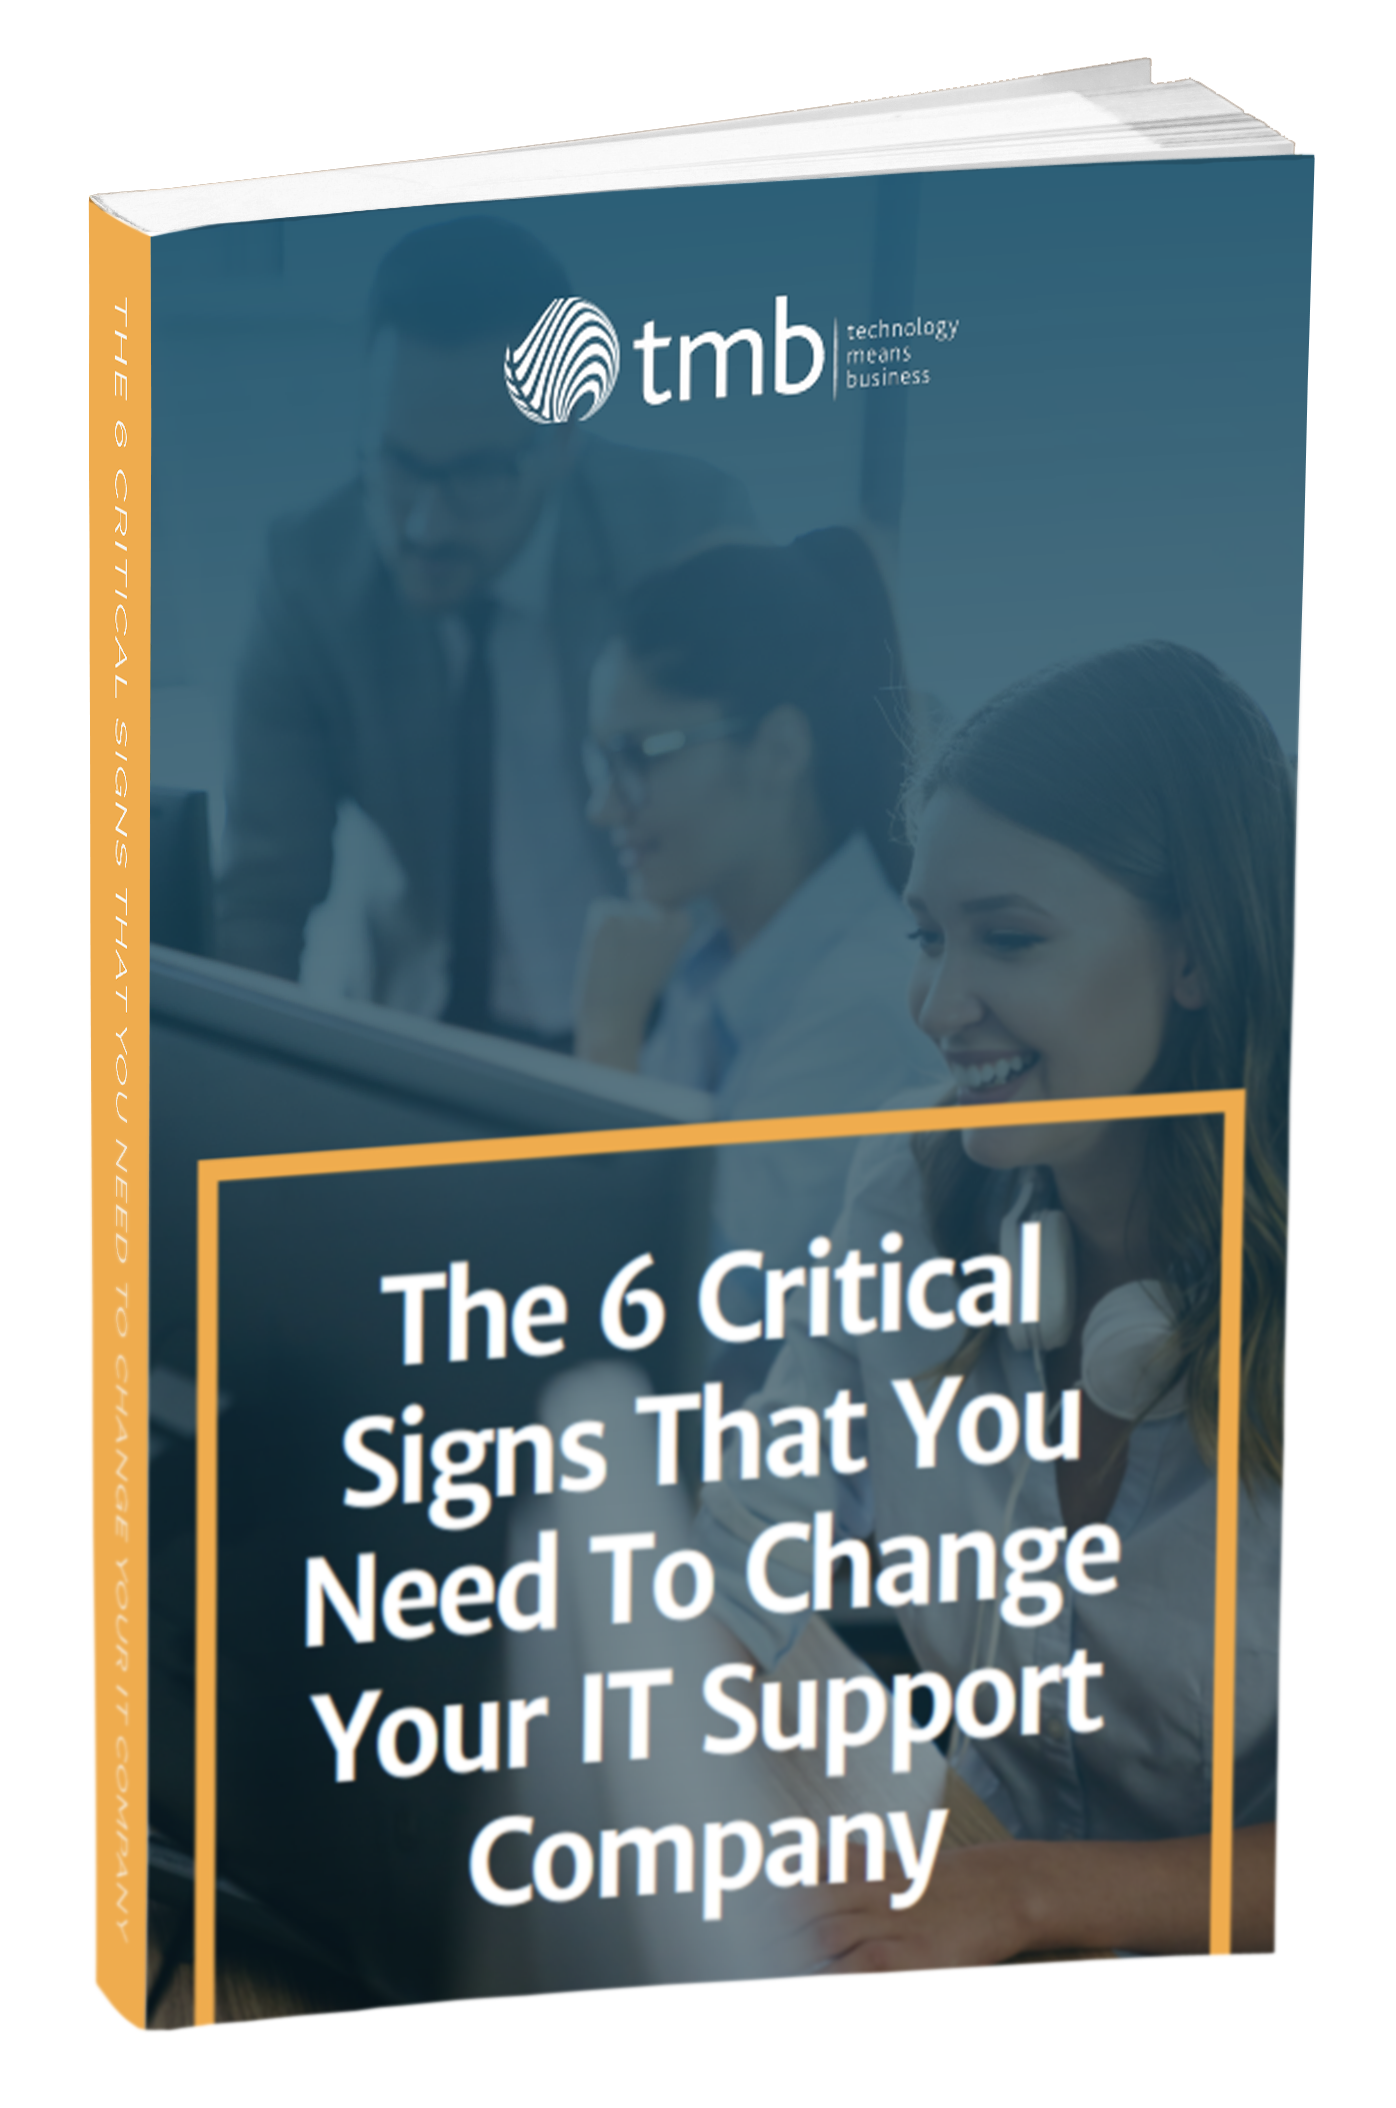 TMB - the 6 critical signs that you need to change your IT company (1)